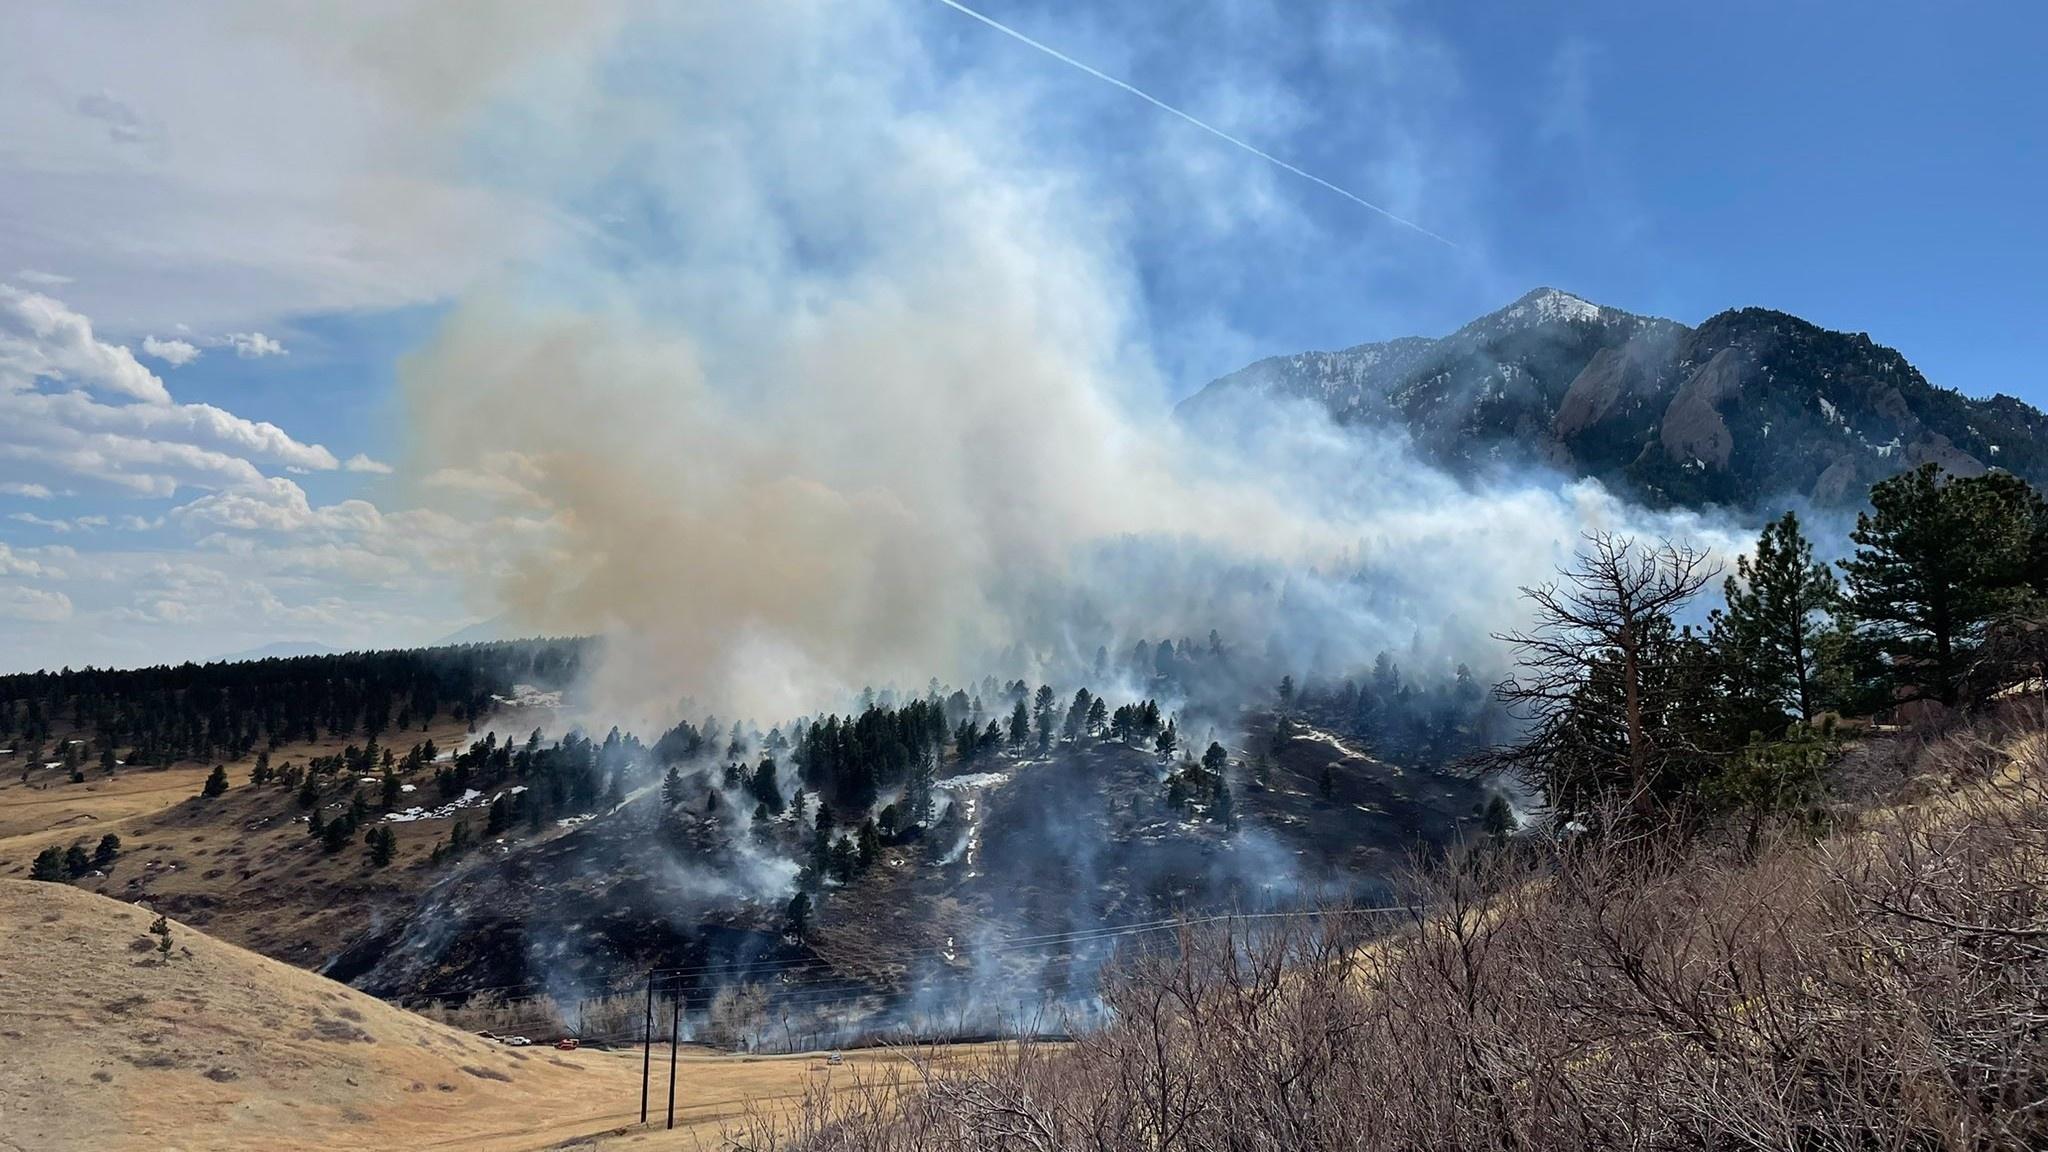 The NCAR Fire started Saturday, March 26 in southwestern Boulder.